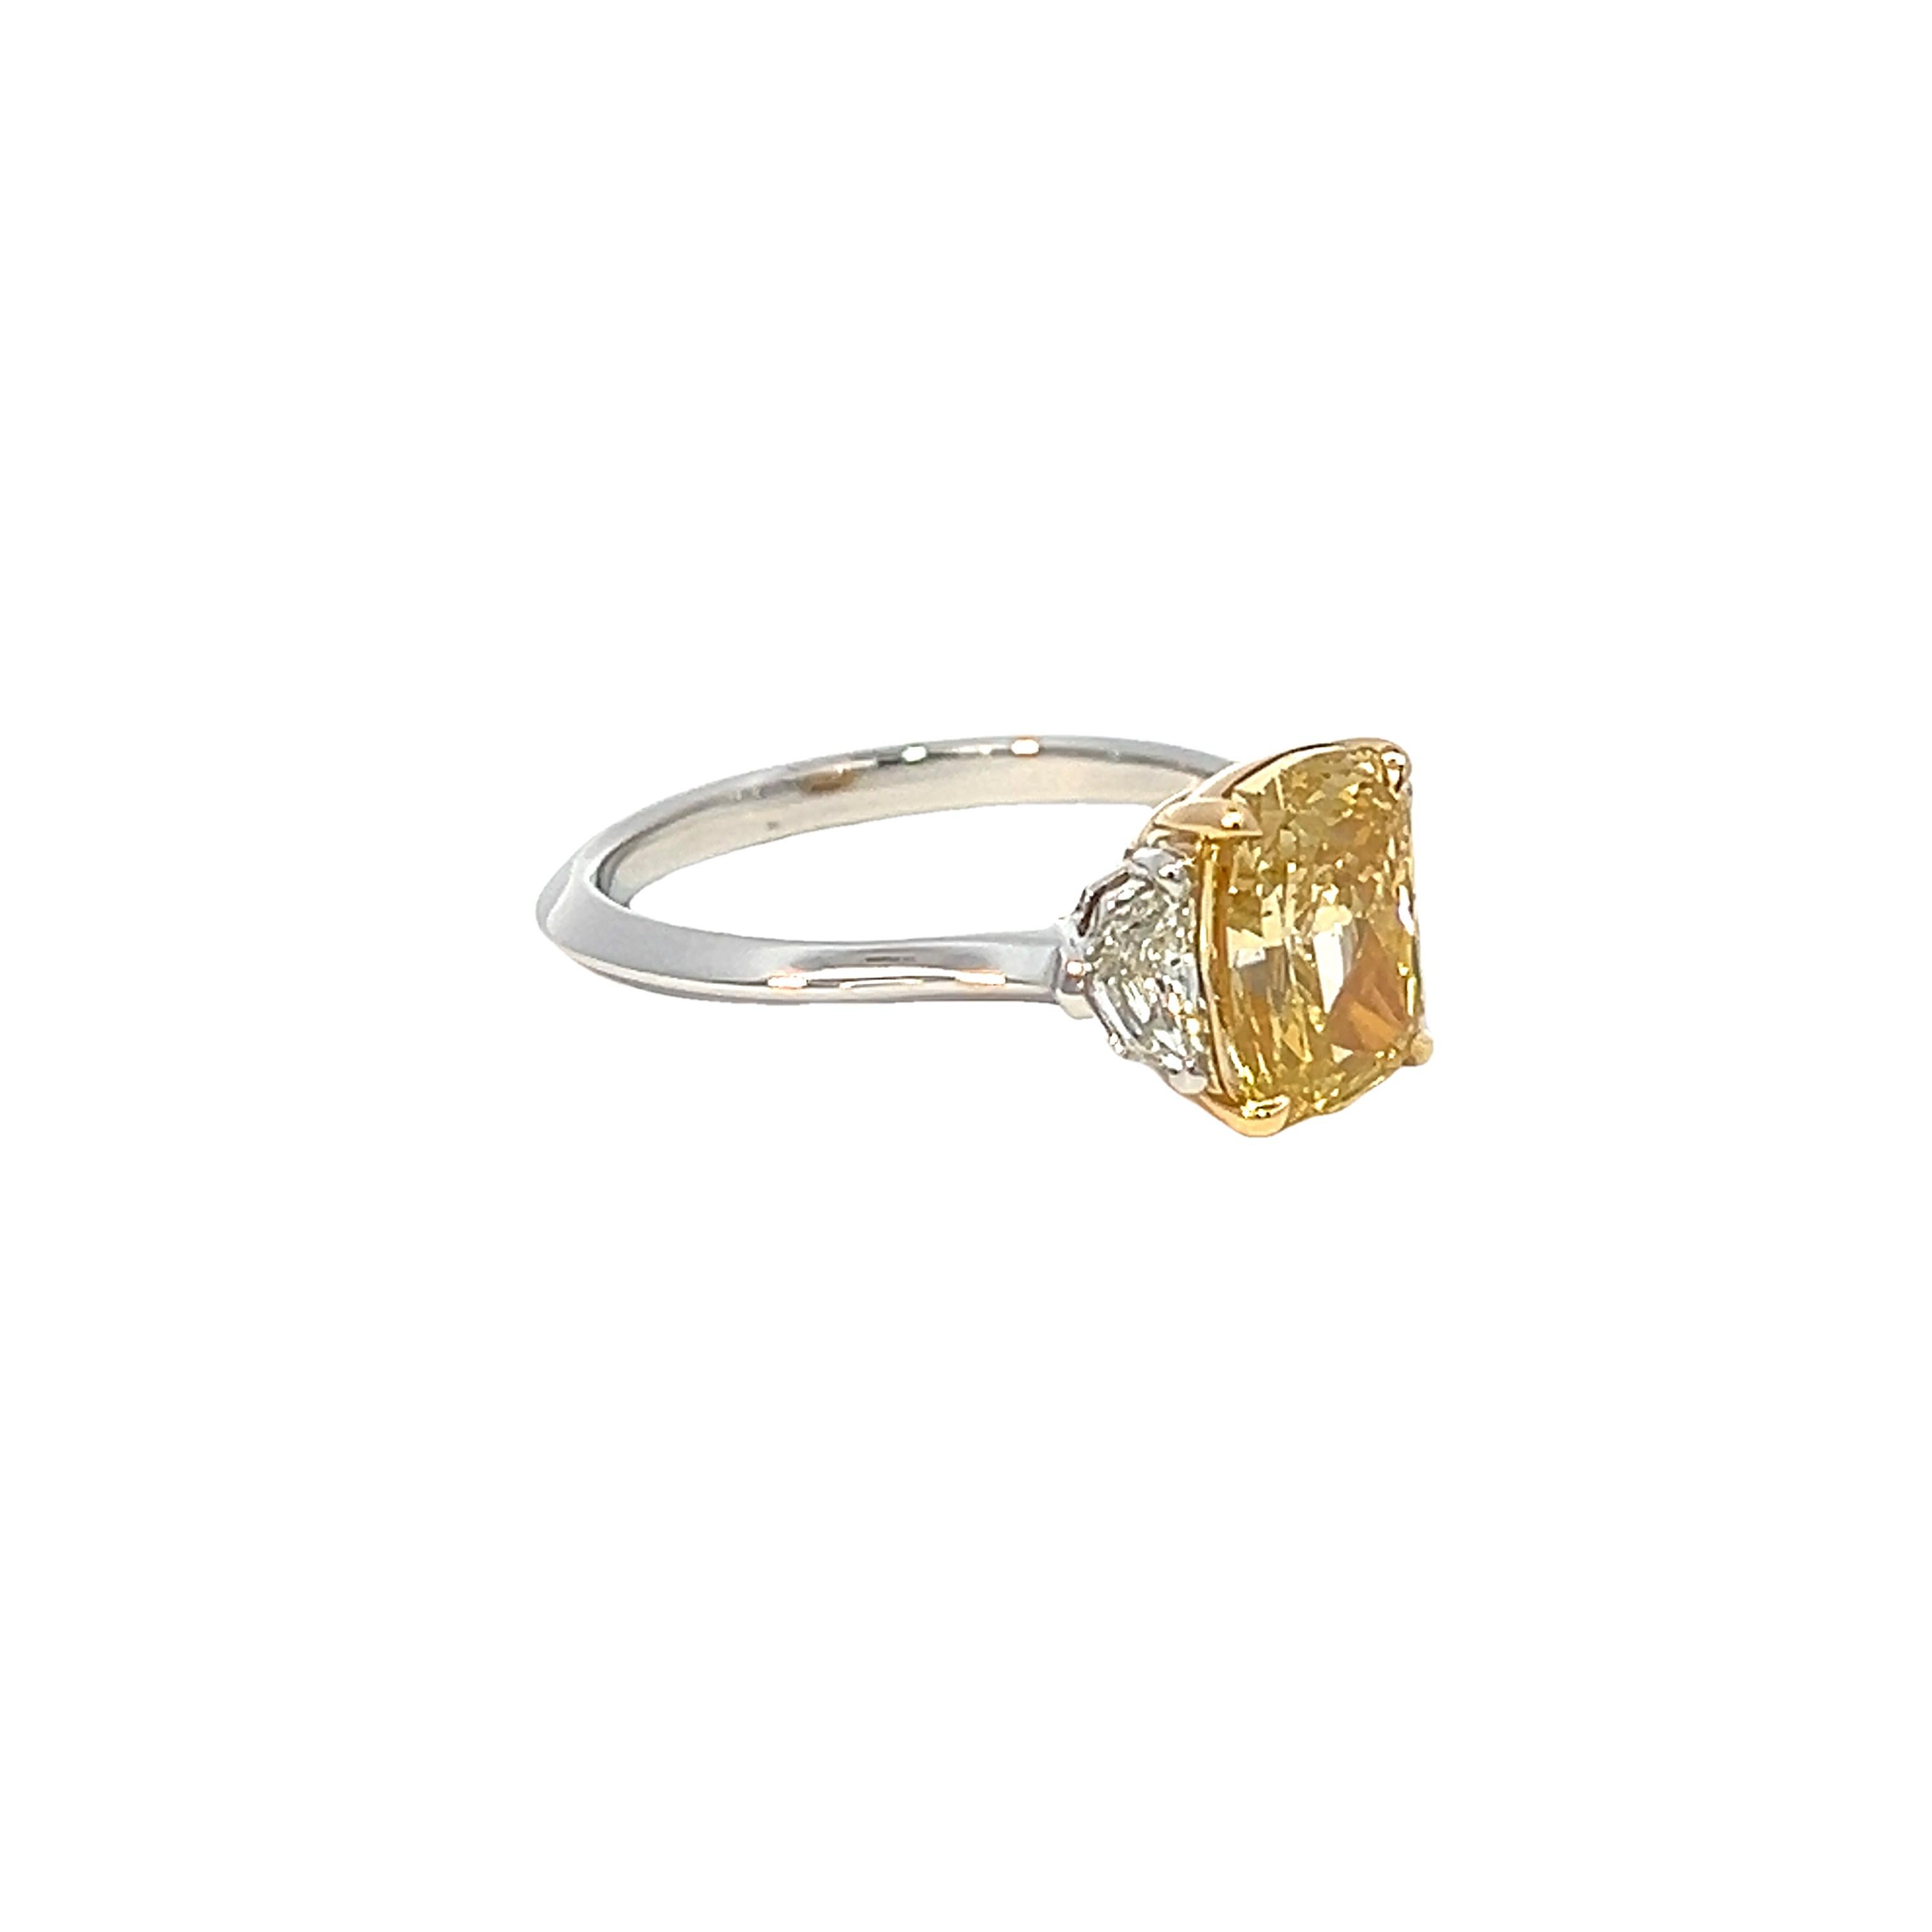 Taille coussin 2.85CT Total Weight Fancy Intense Yellow Diamond Ring, GIA Cert en vente